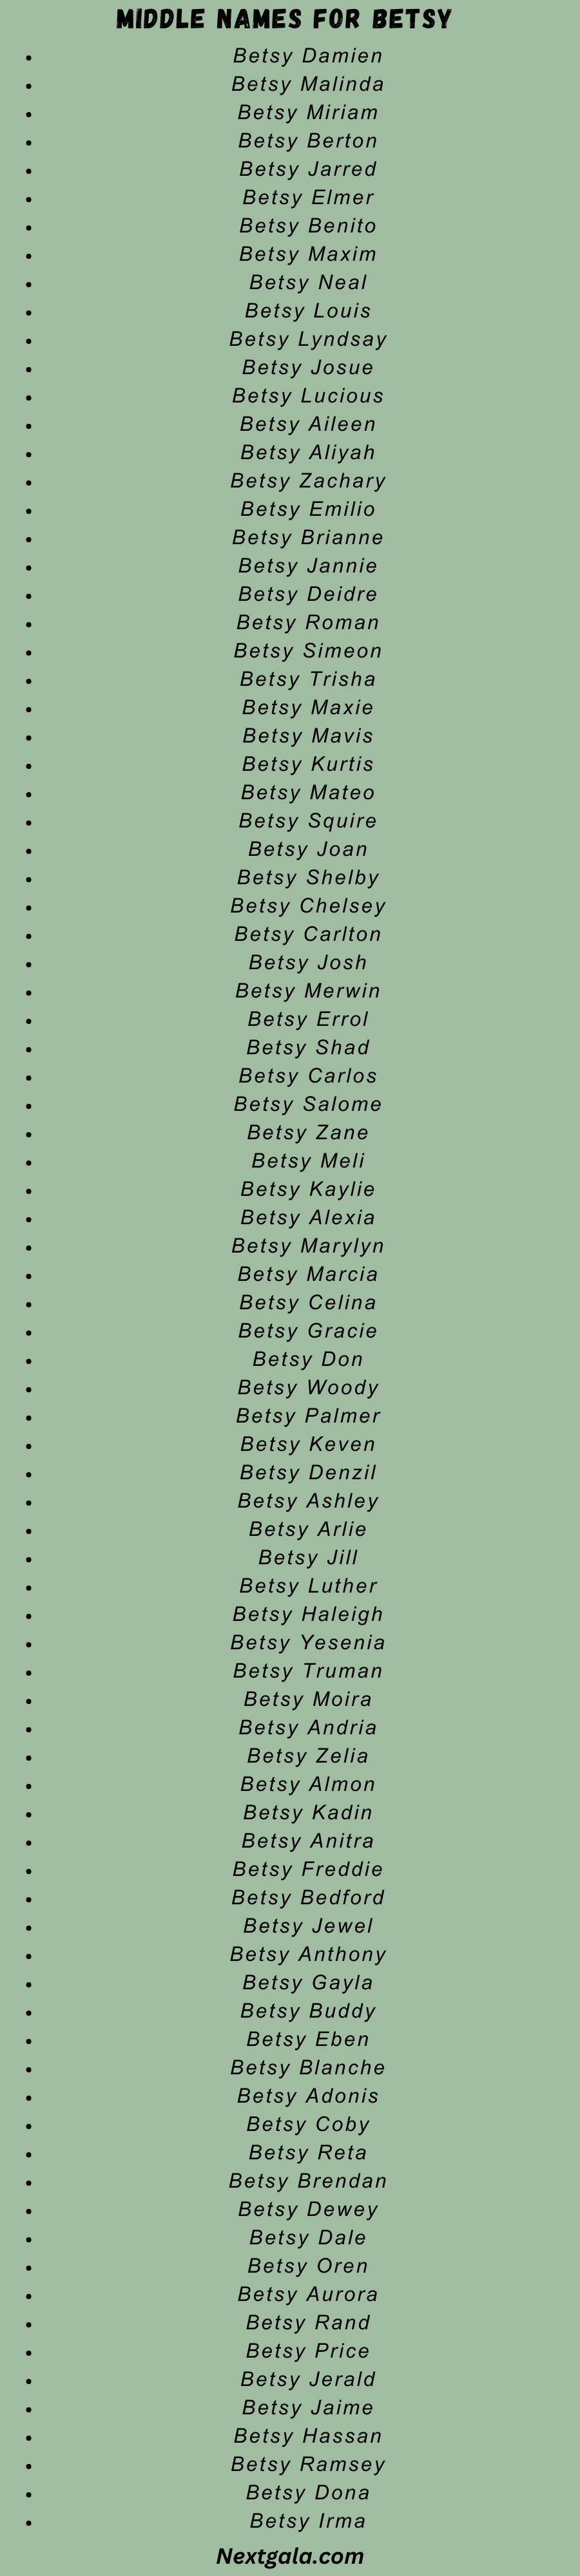 Middle Names for Betsy